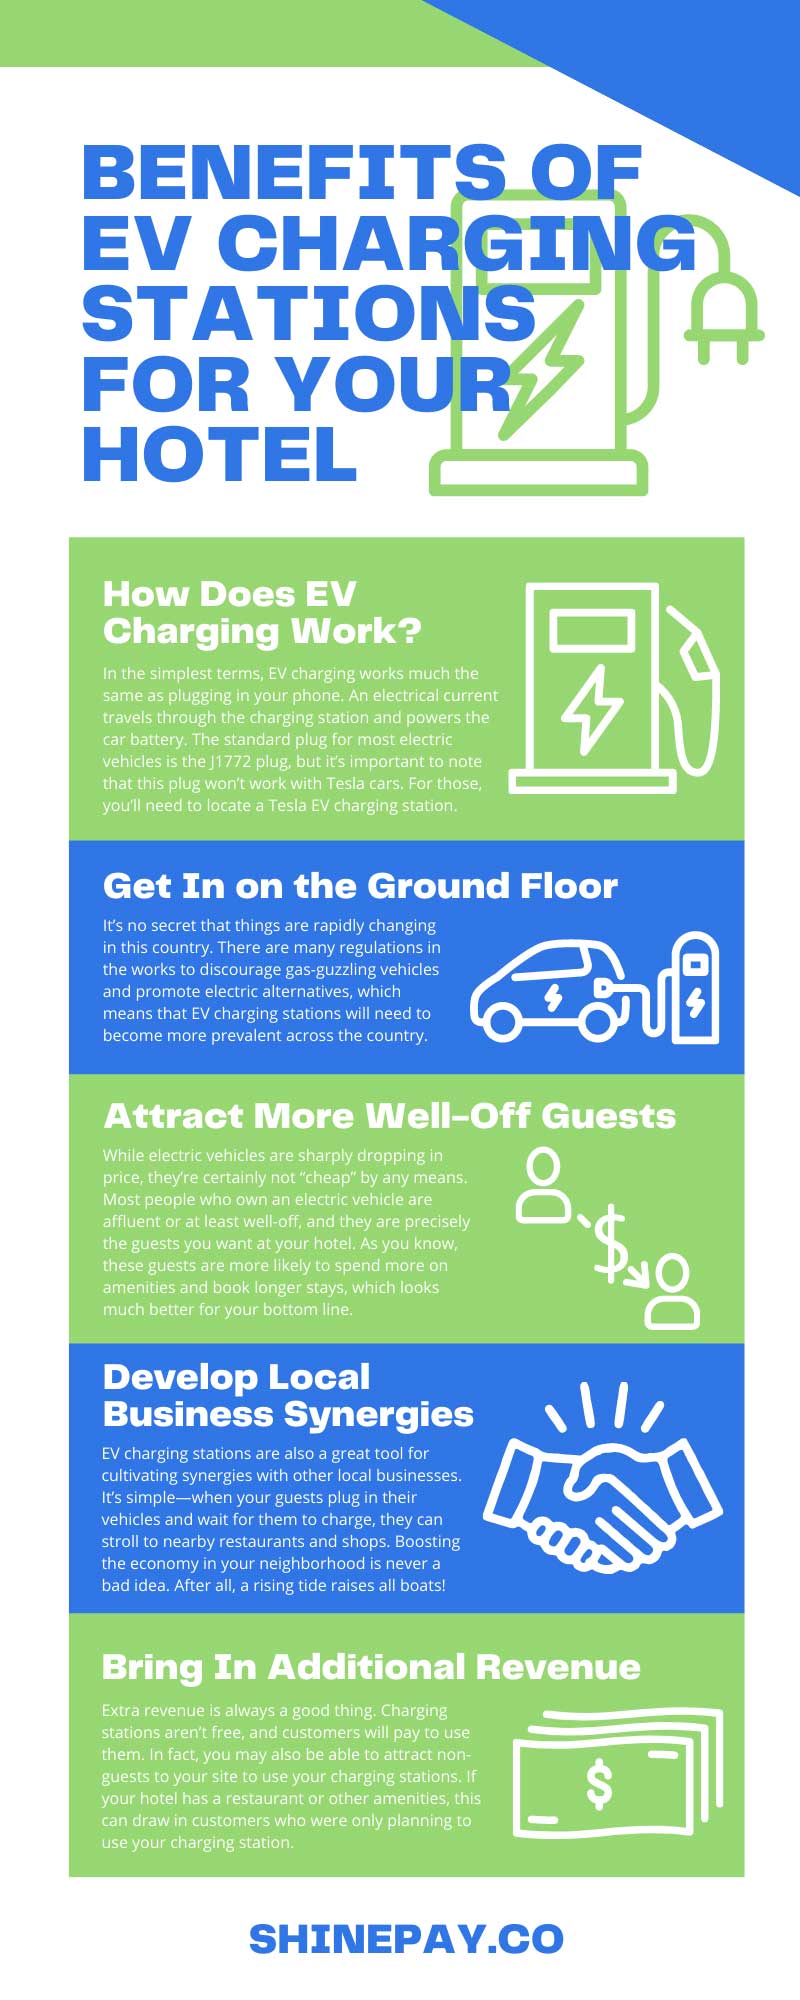 Benefits of EV Charging Stations for Your Hotel